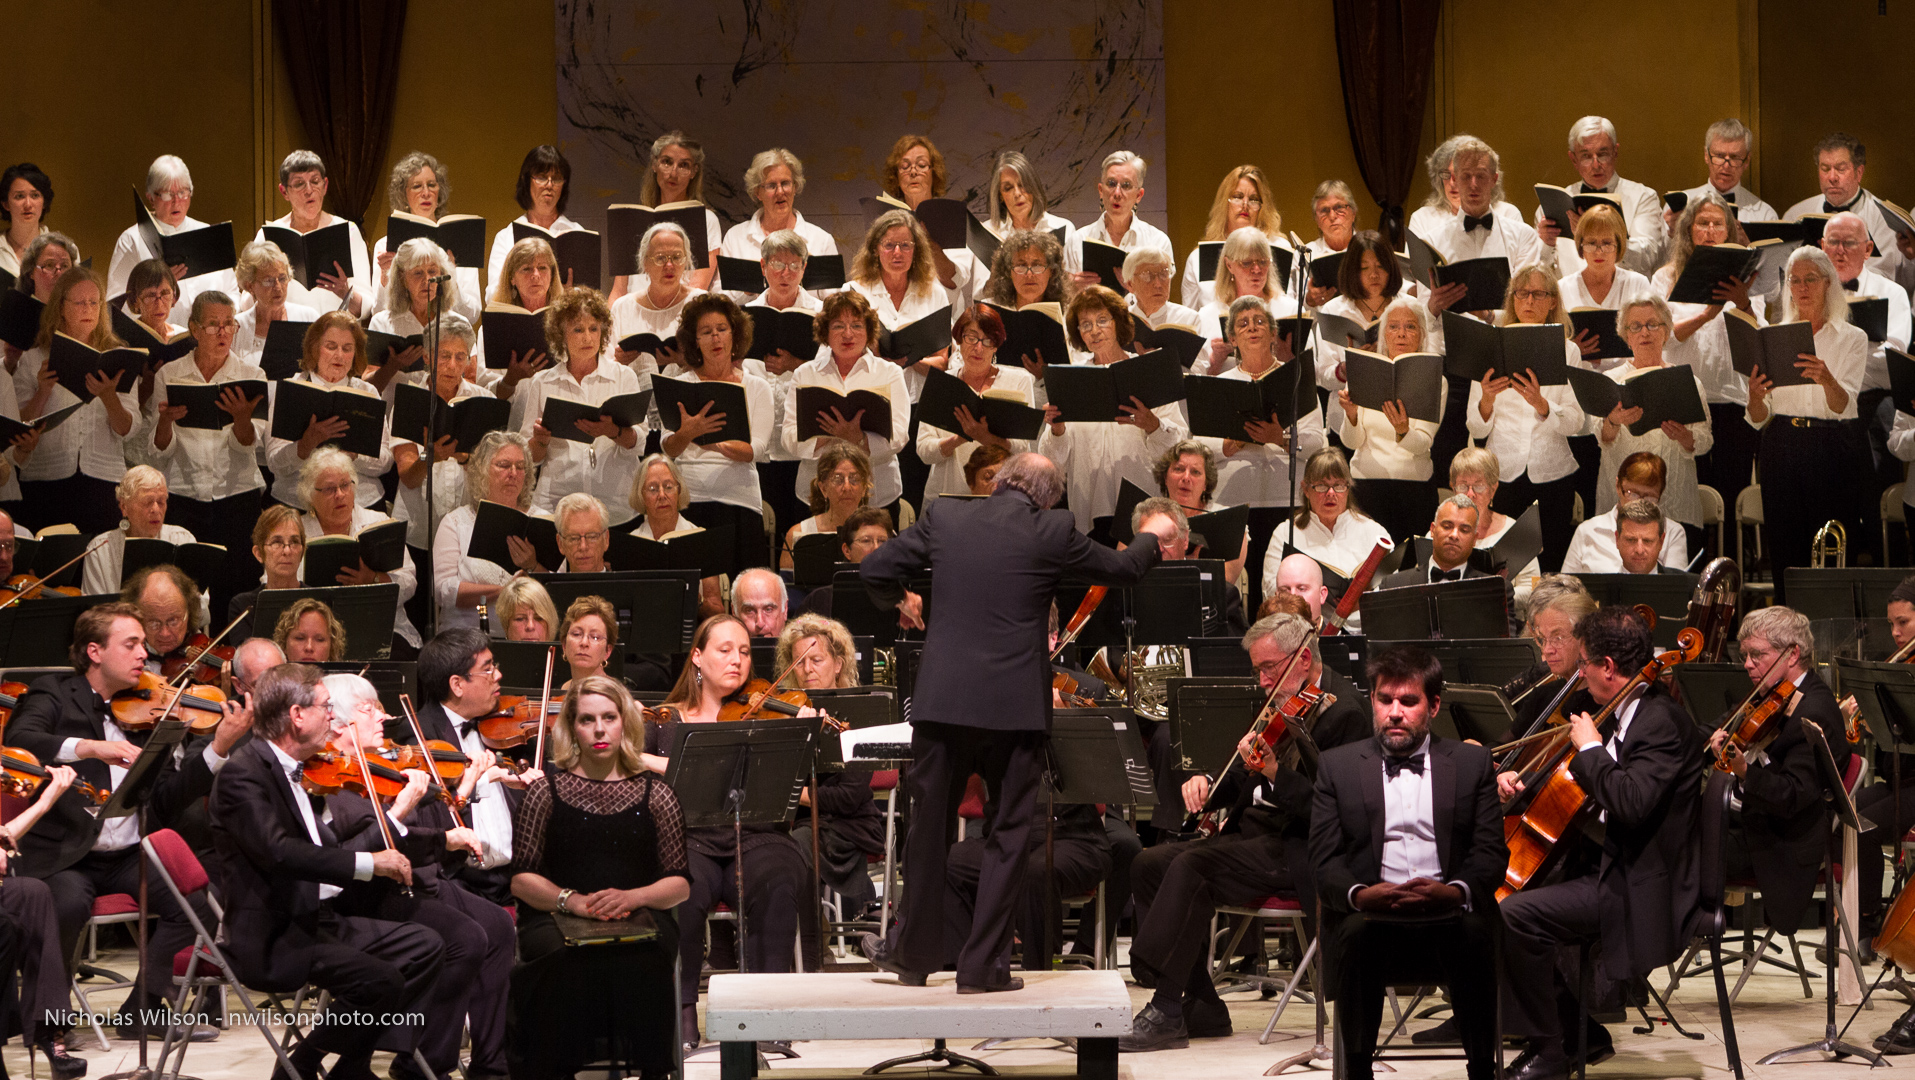 The central core of the MMF Orchestra and Chorus